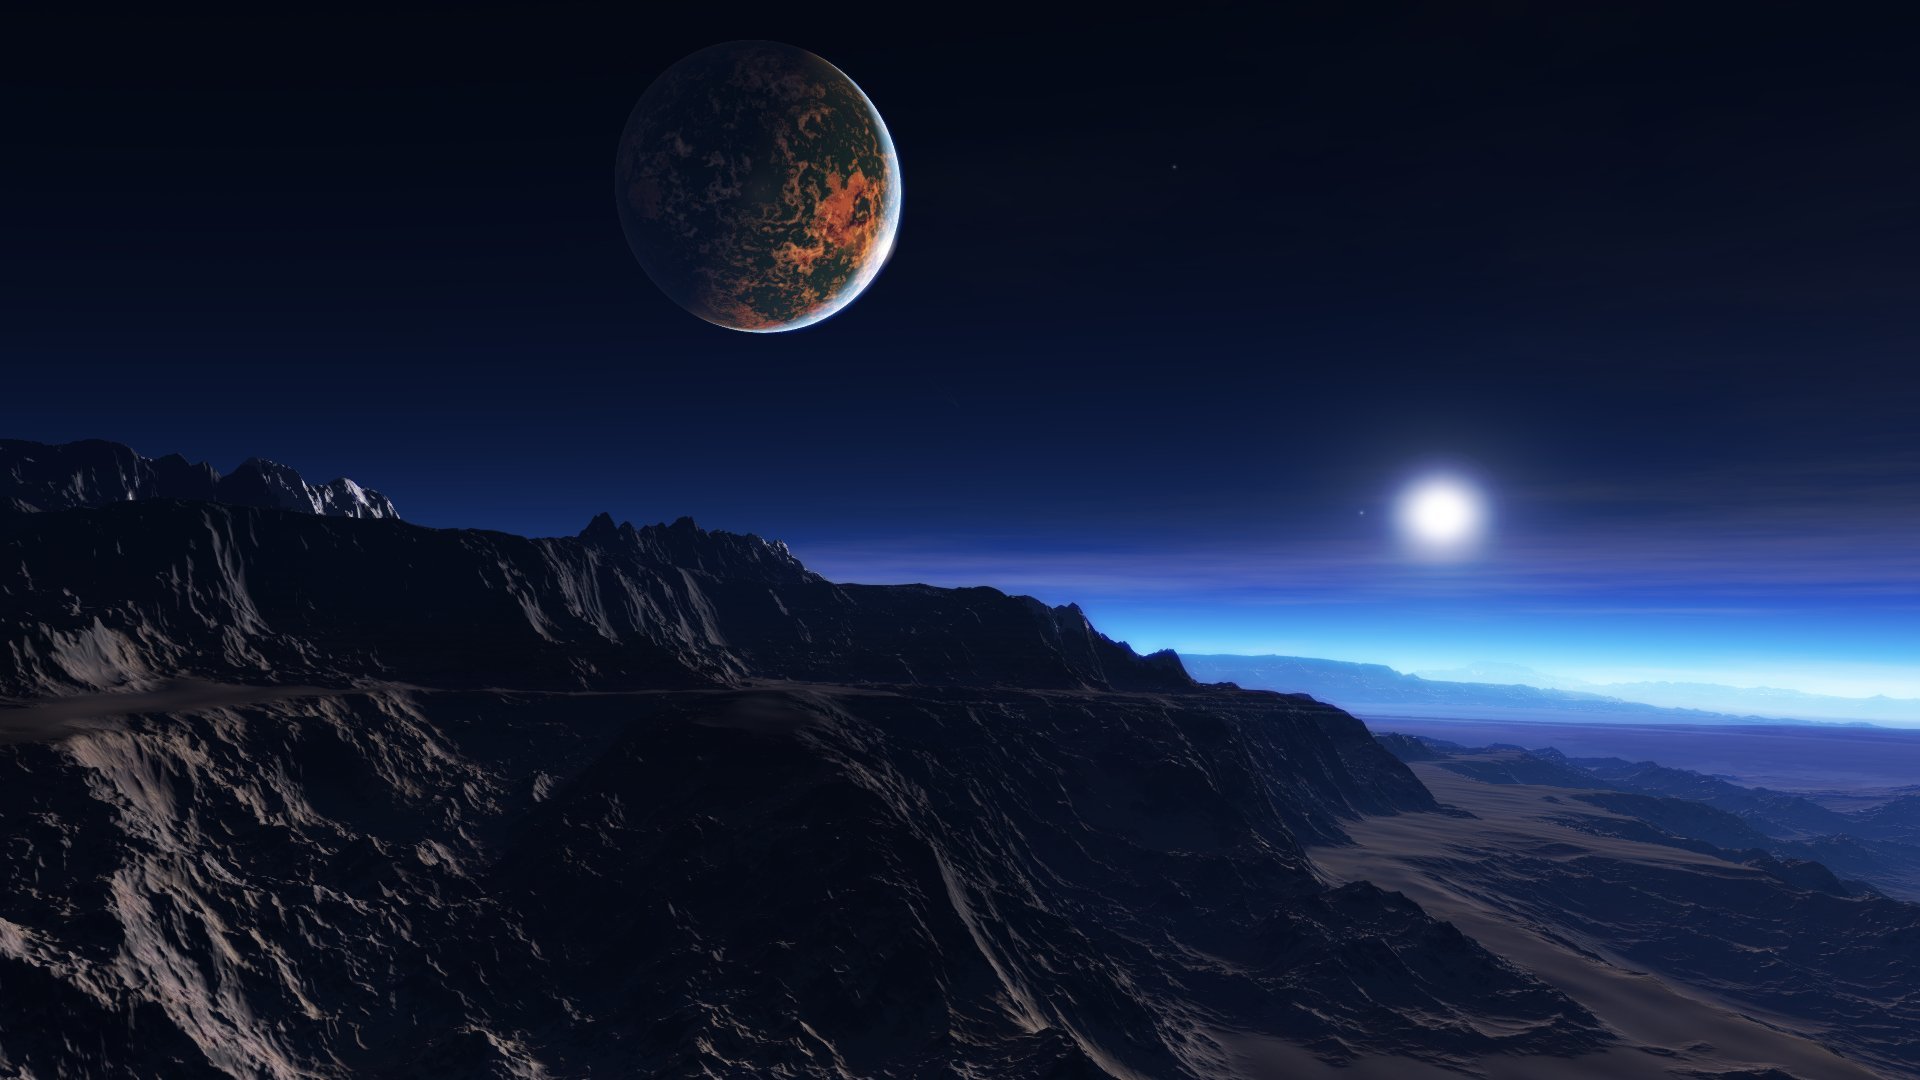 exoplanet_atmosphere_clouds_stars_moon_mist_mountains_rocks_101205_1920x1080